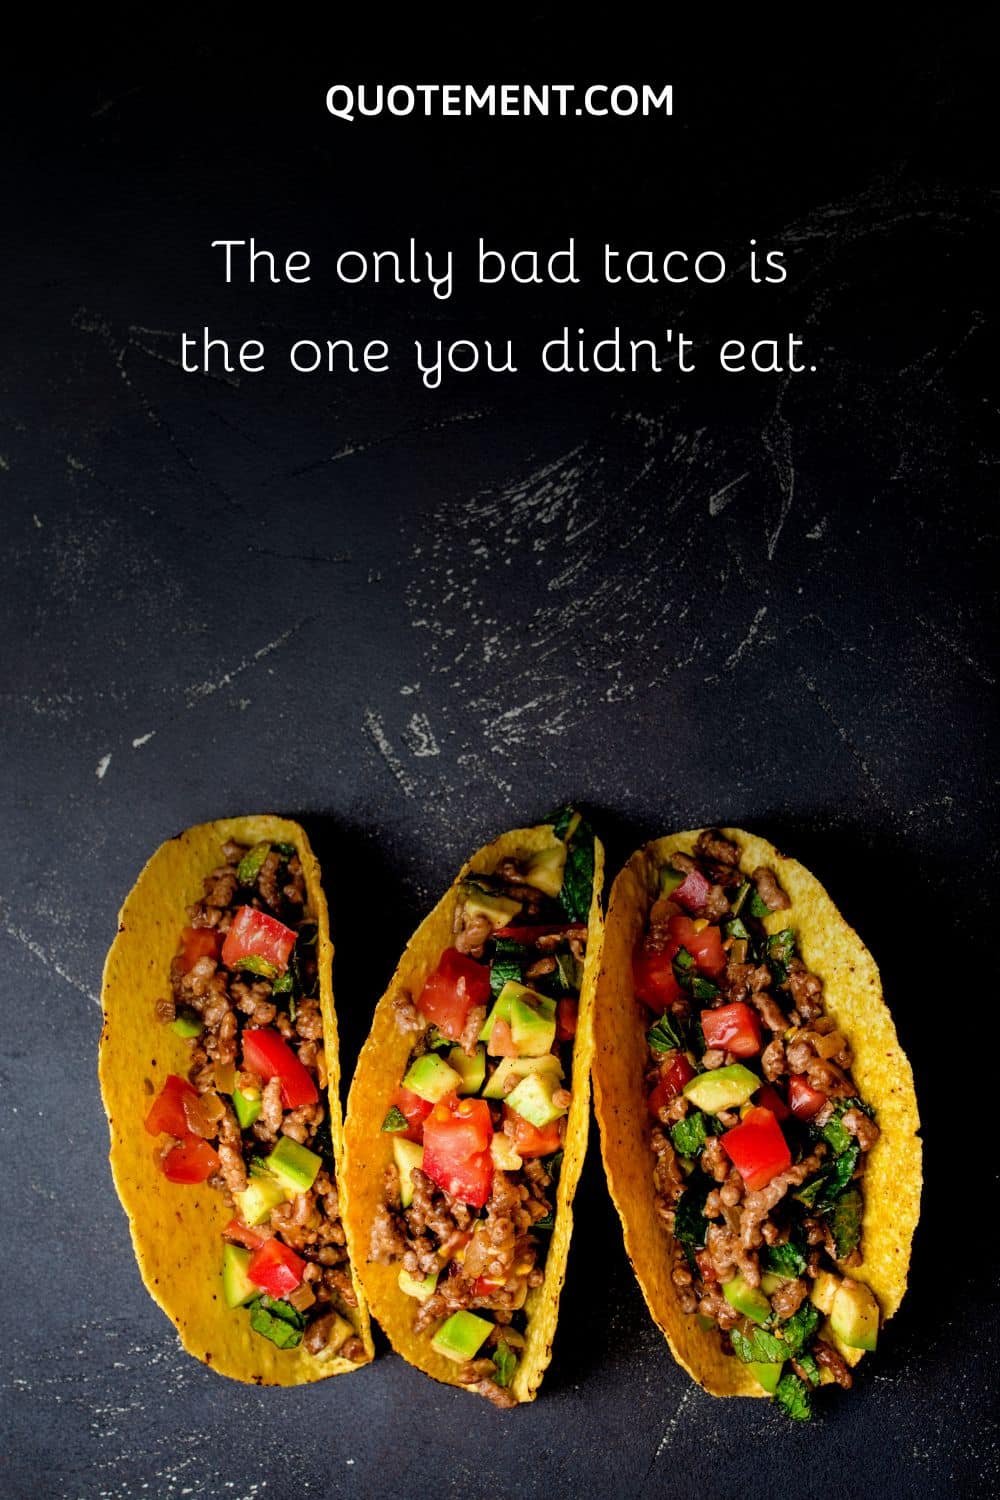 The only bad taco is the one you didn’t eat